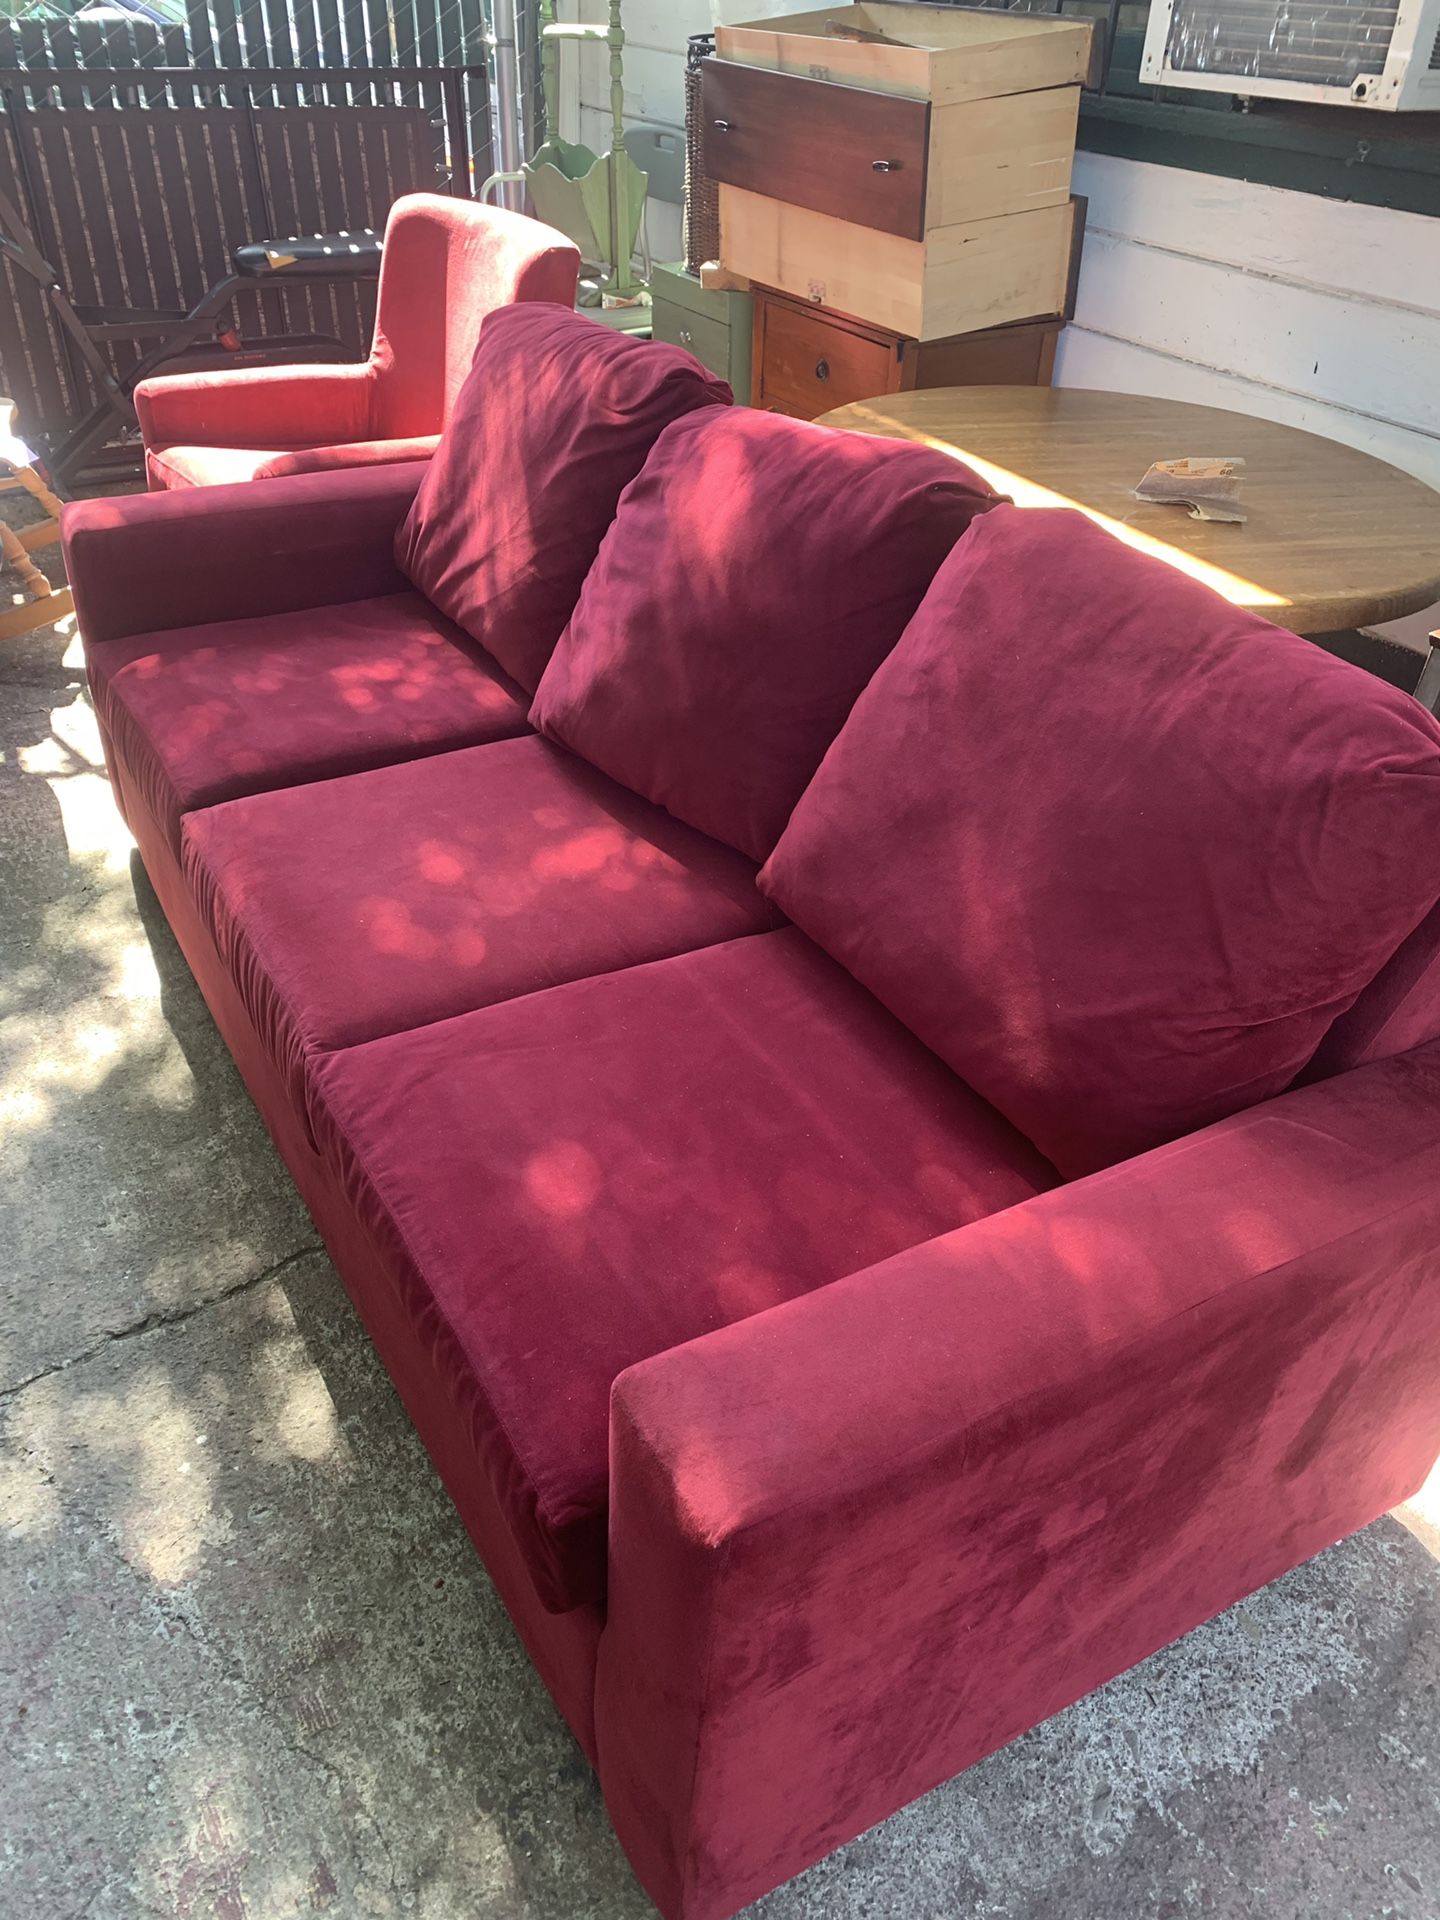 Red couch with the red chair very good clean condition 200